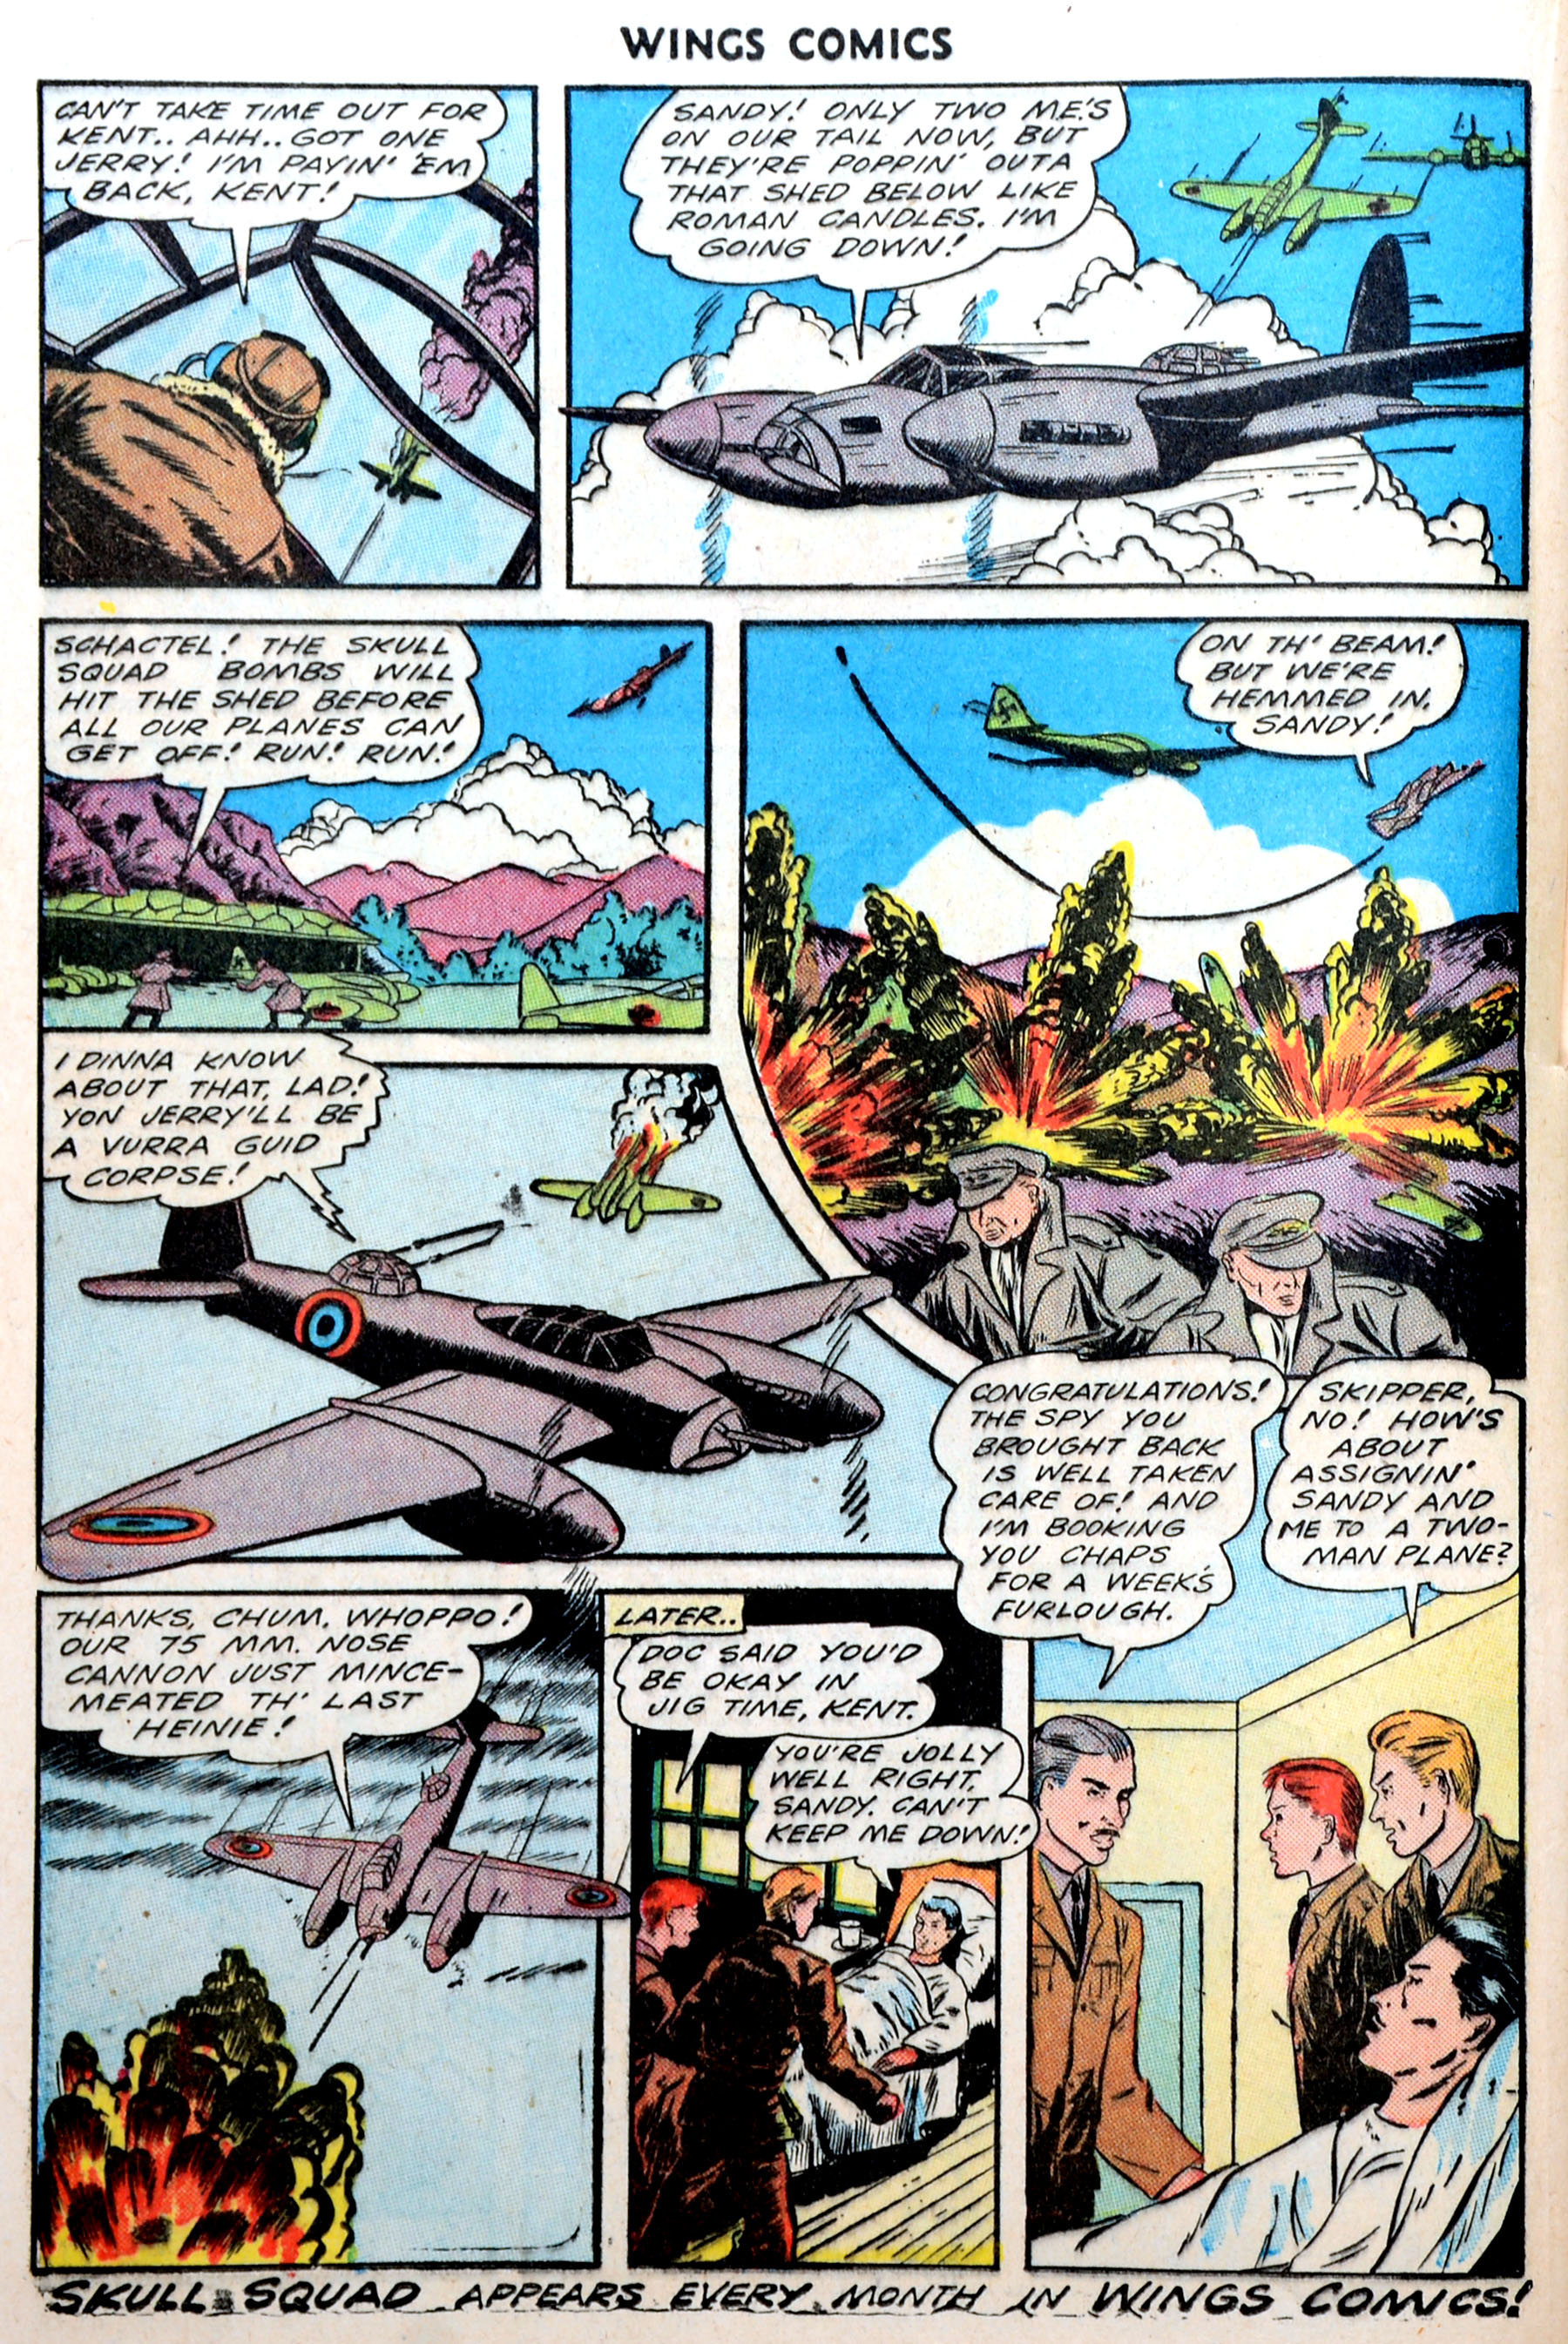 Read online Wings Comics comic -  Issue #47 - 32